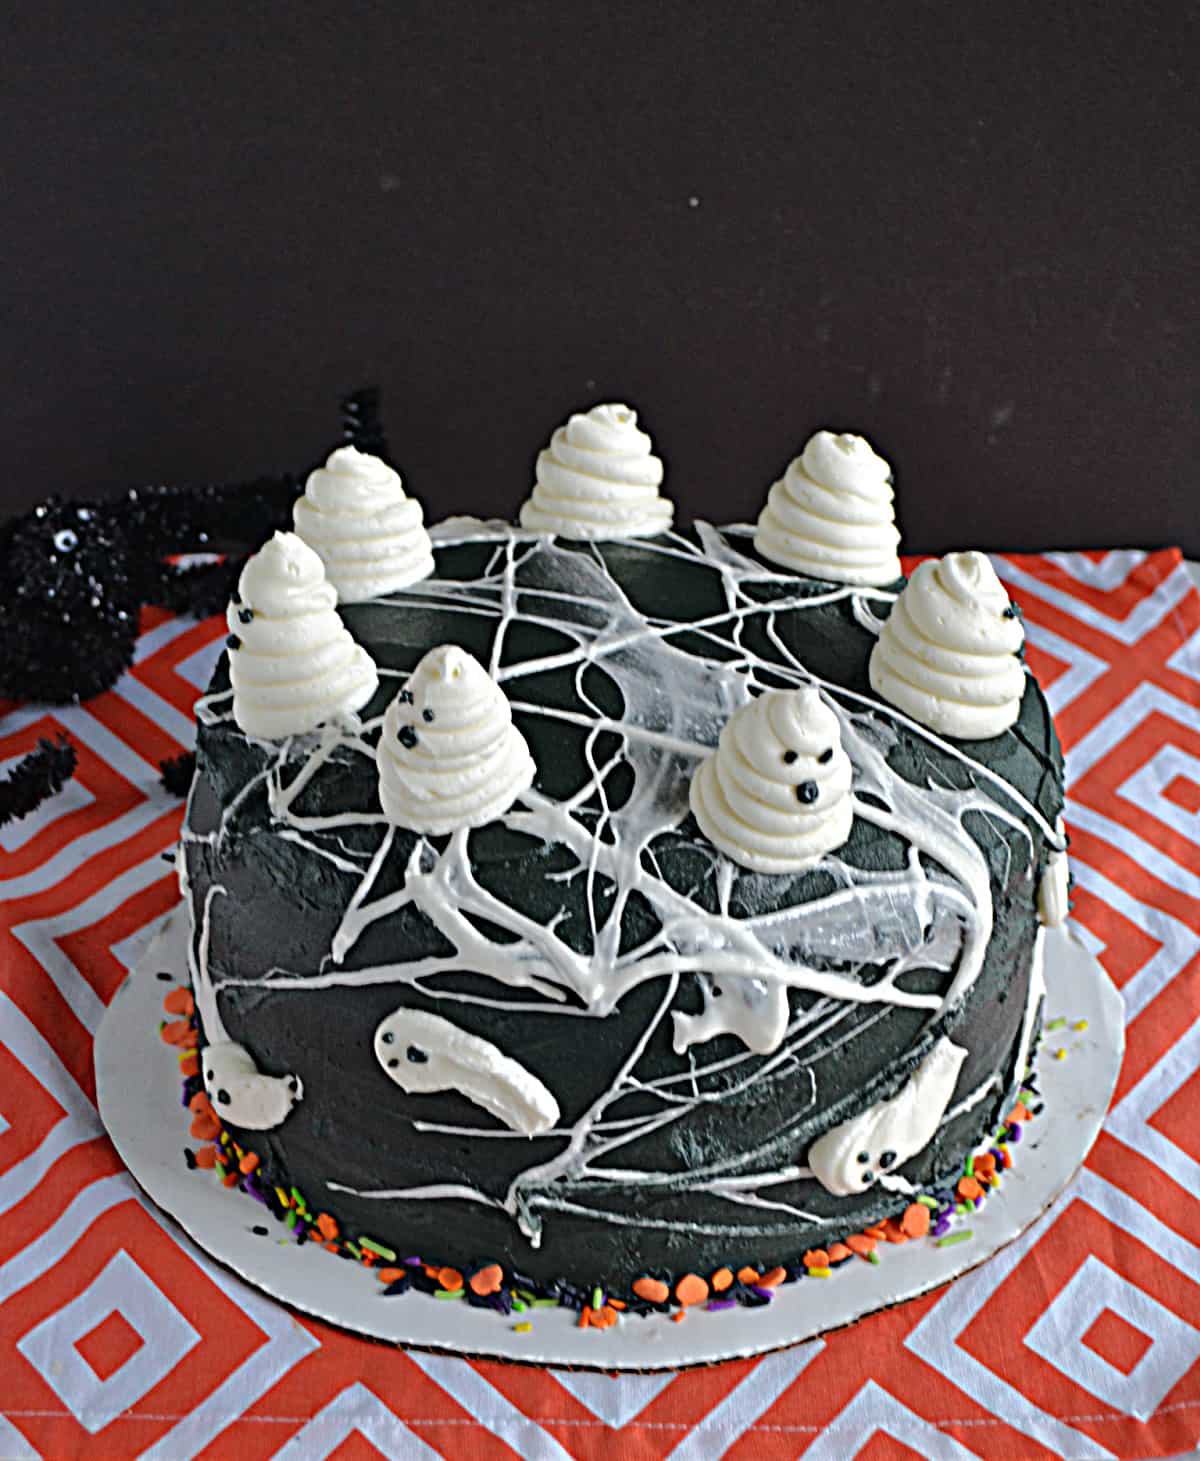 Baked this ghost cake for my son's birthday. : r/Baking